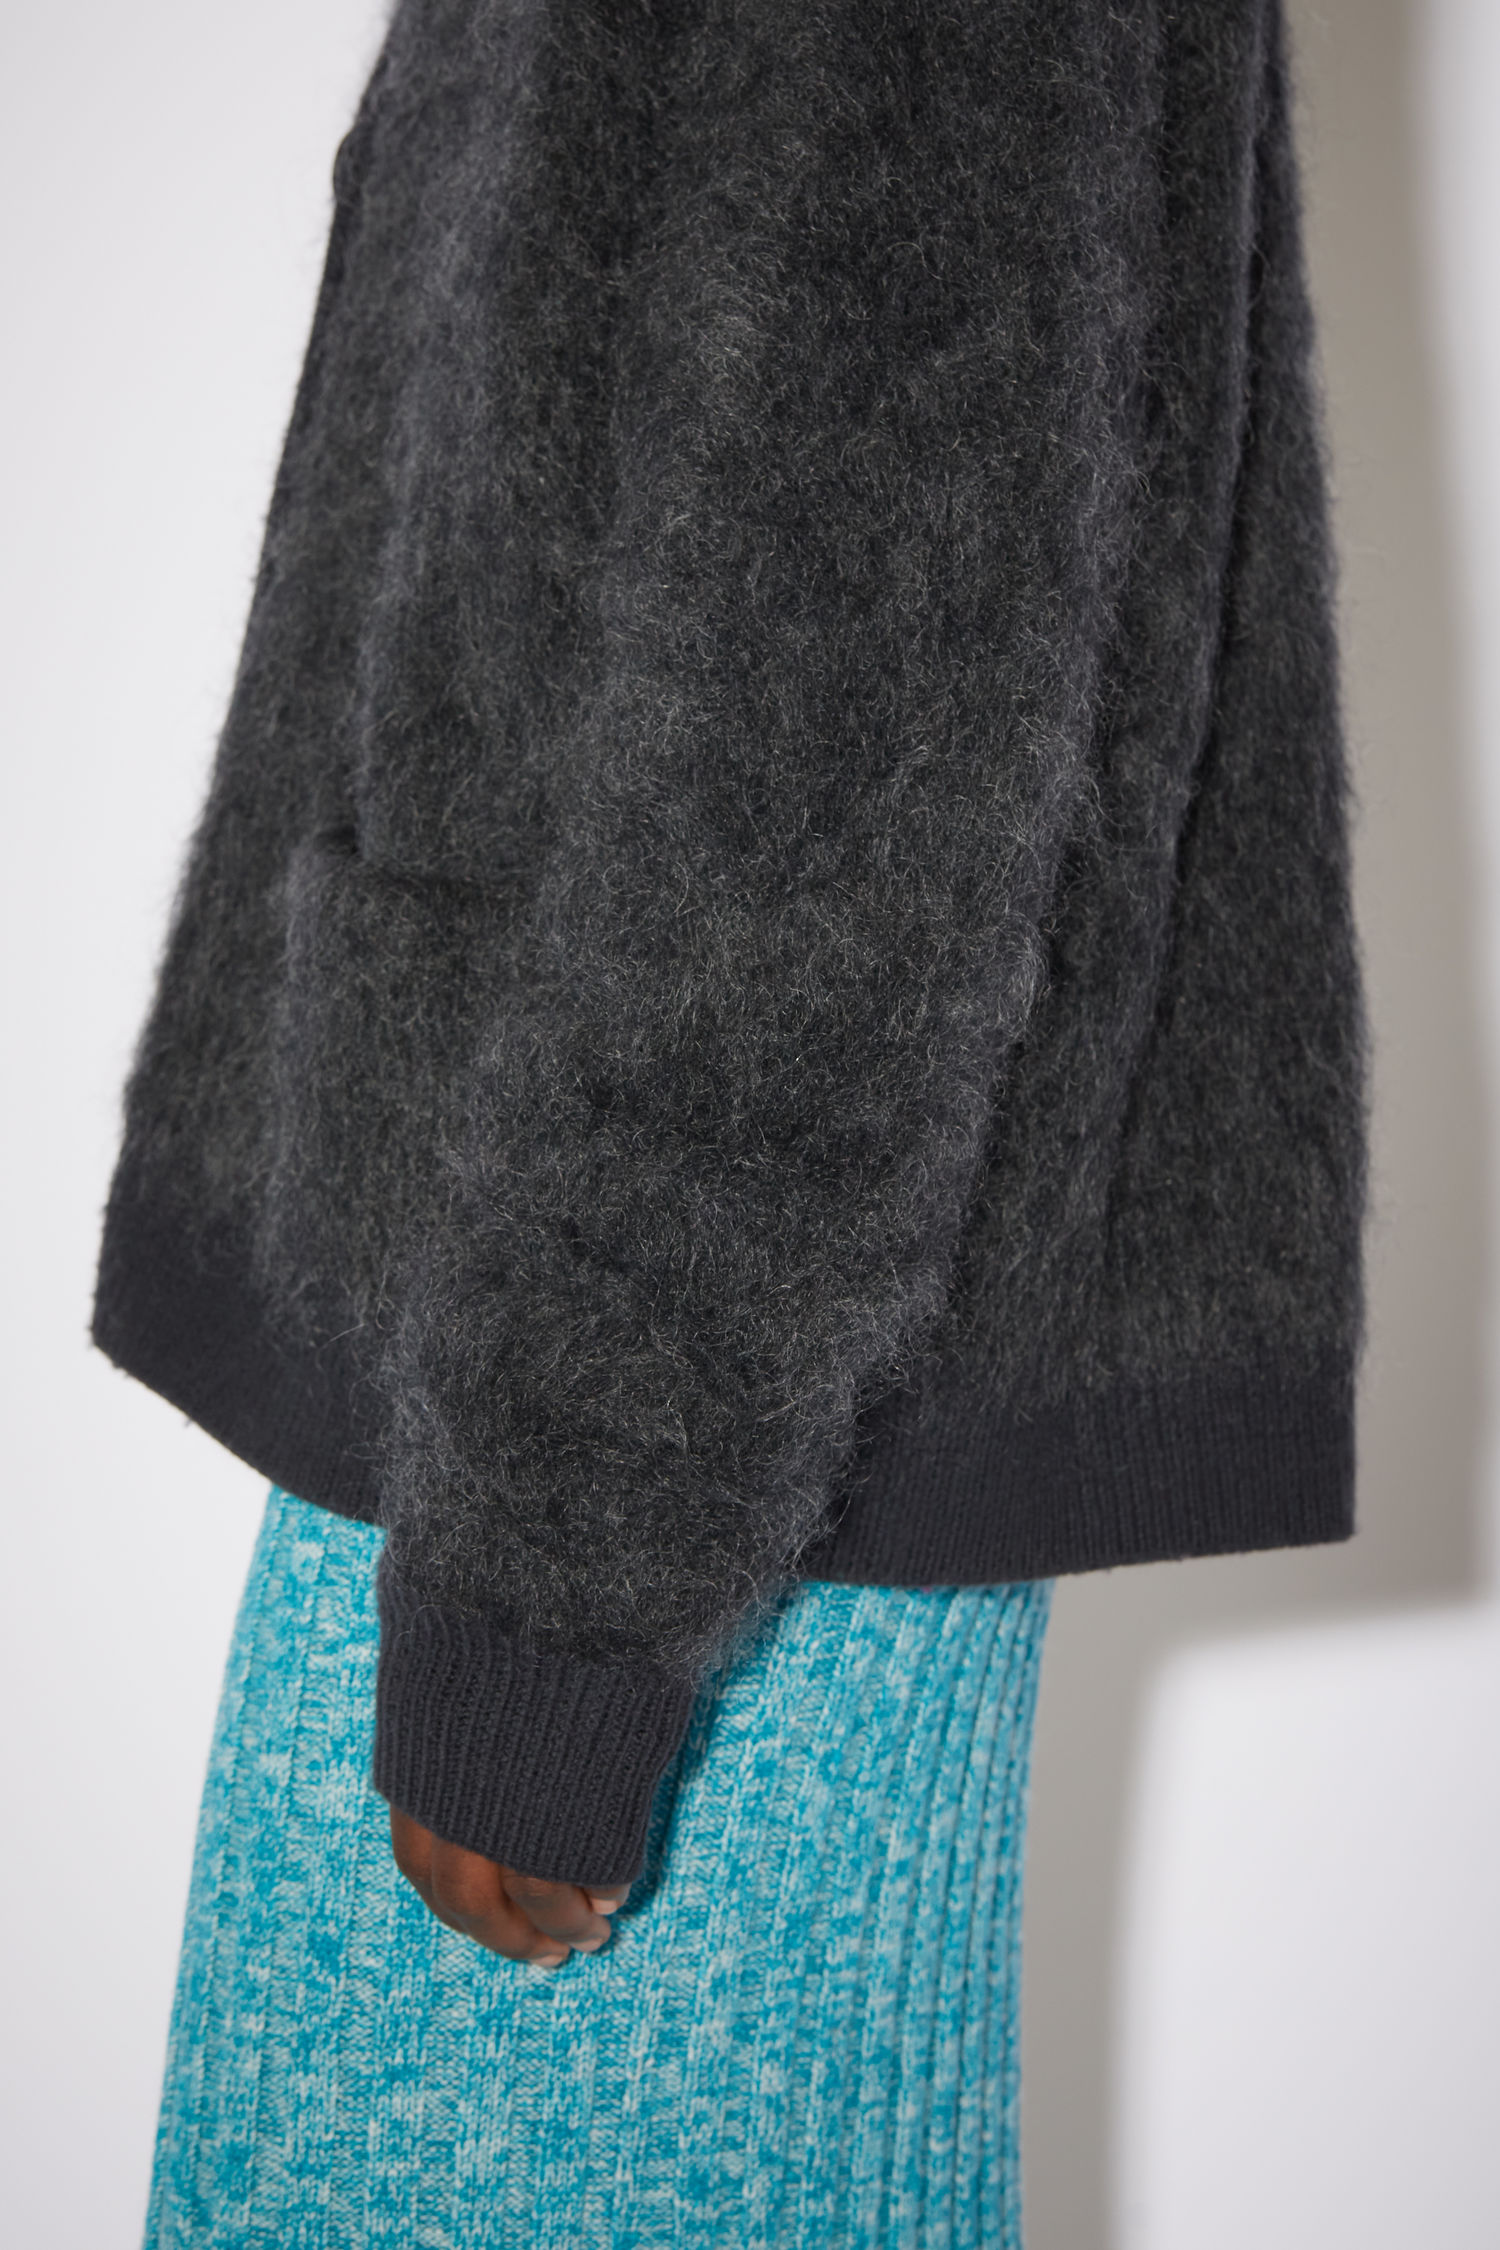 Acne Studios - Mohair wool fluffy cardigan - Anthracite grey